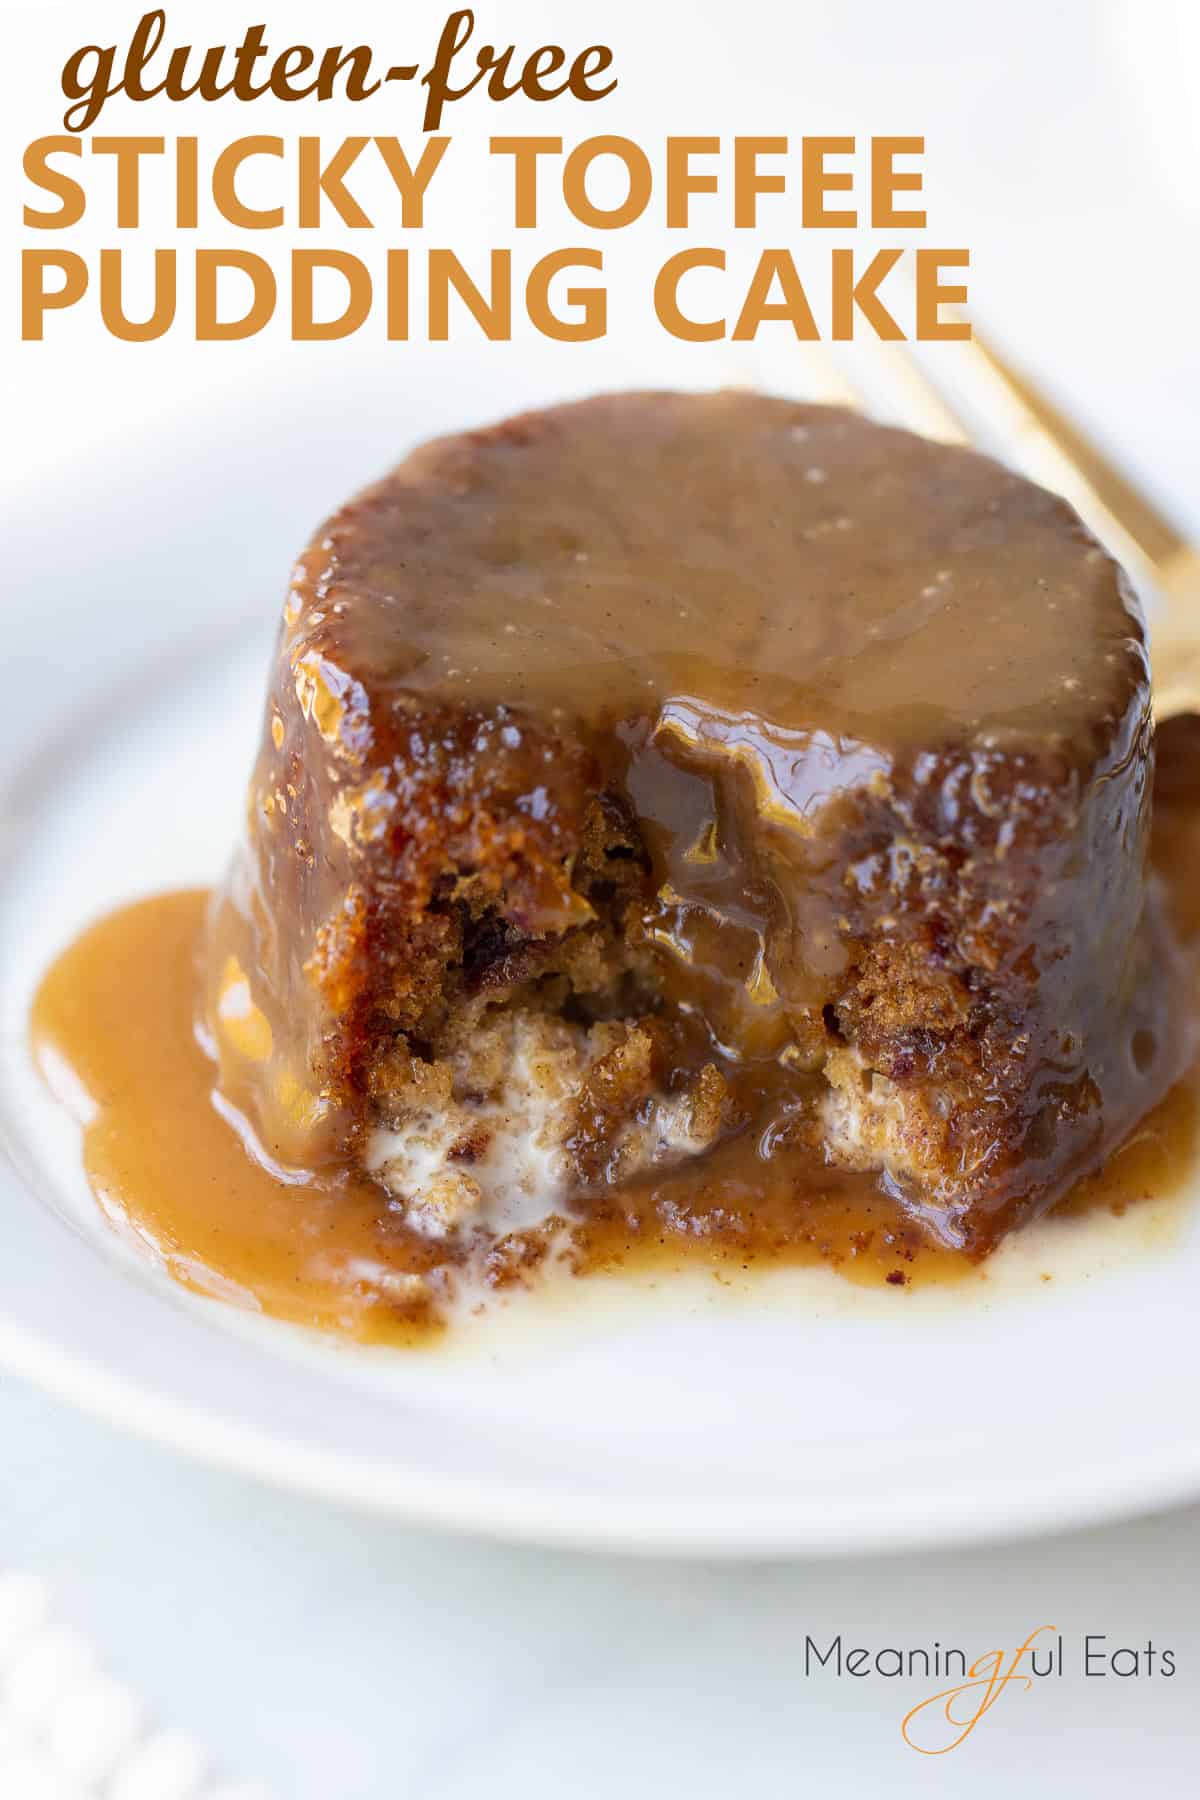 image for pinterest - close up shot of sticky toffee pudding covered in sauce on white plate